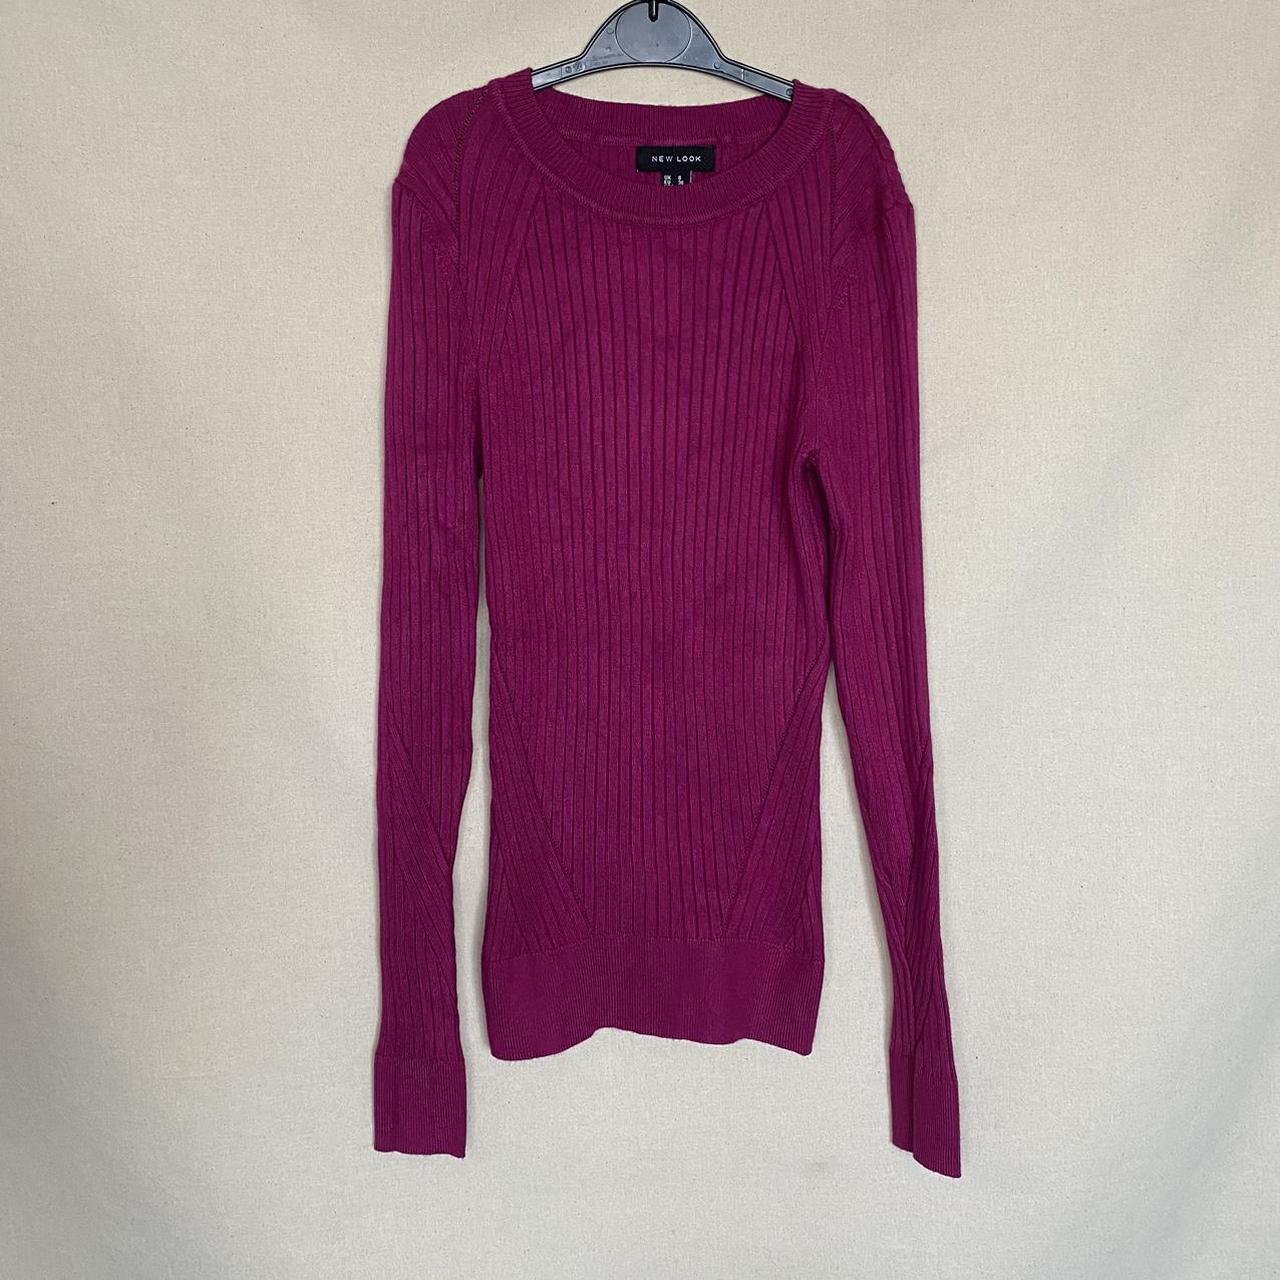 New Look Jumper Work Party Formal - pink stretchy... - Depop